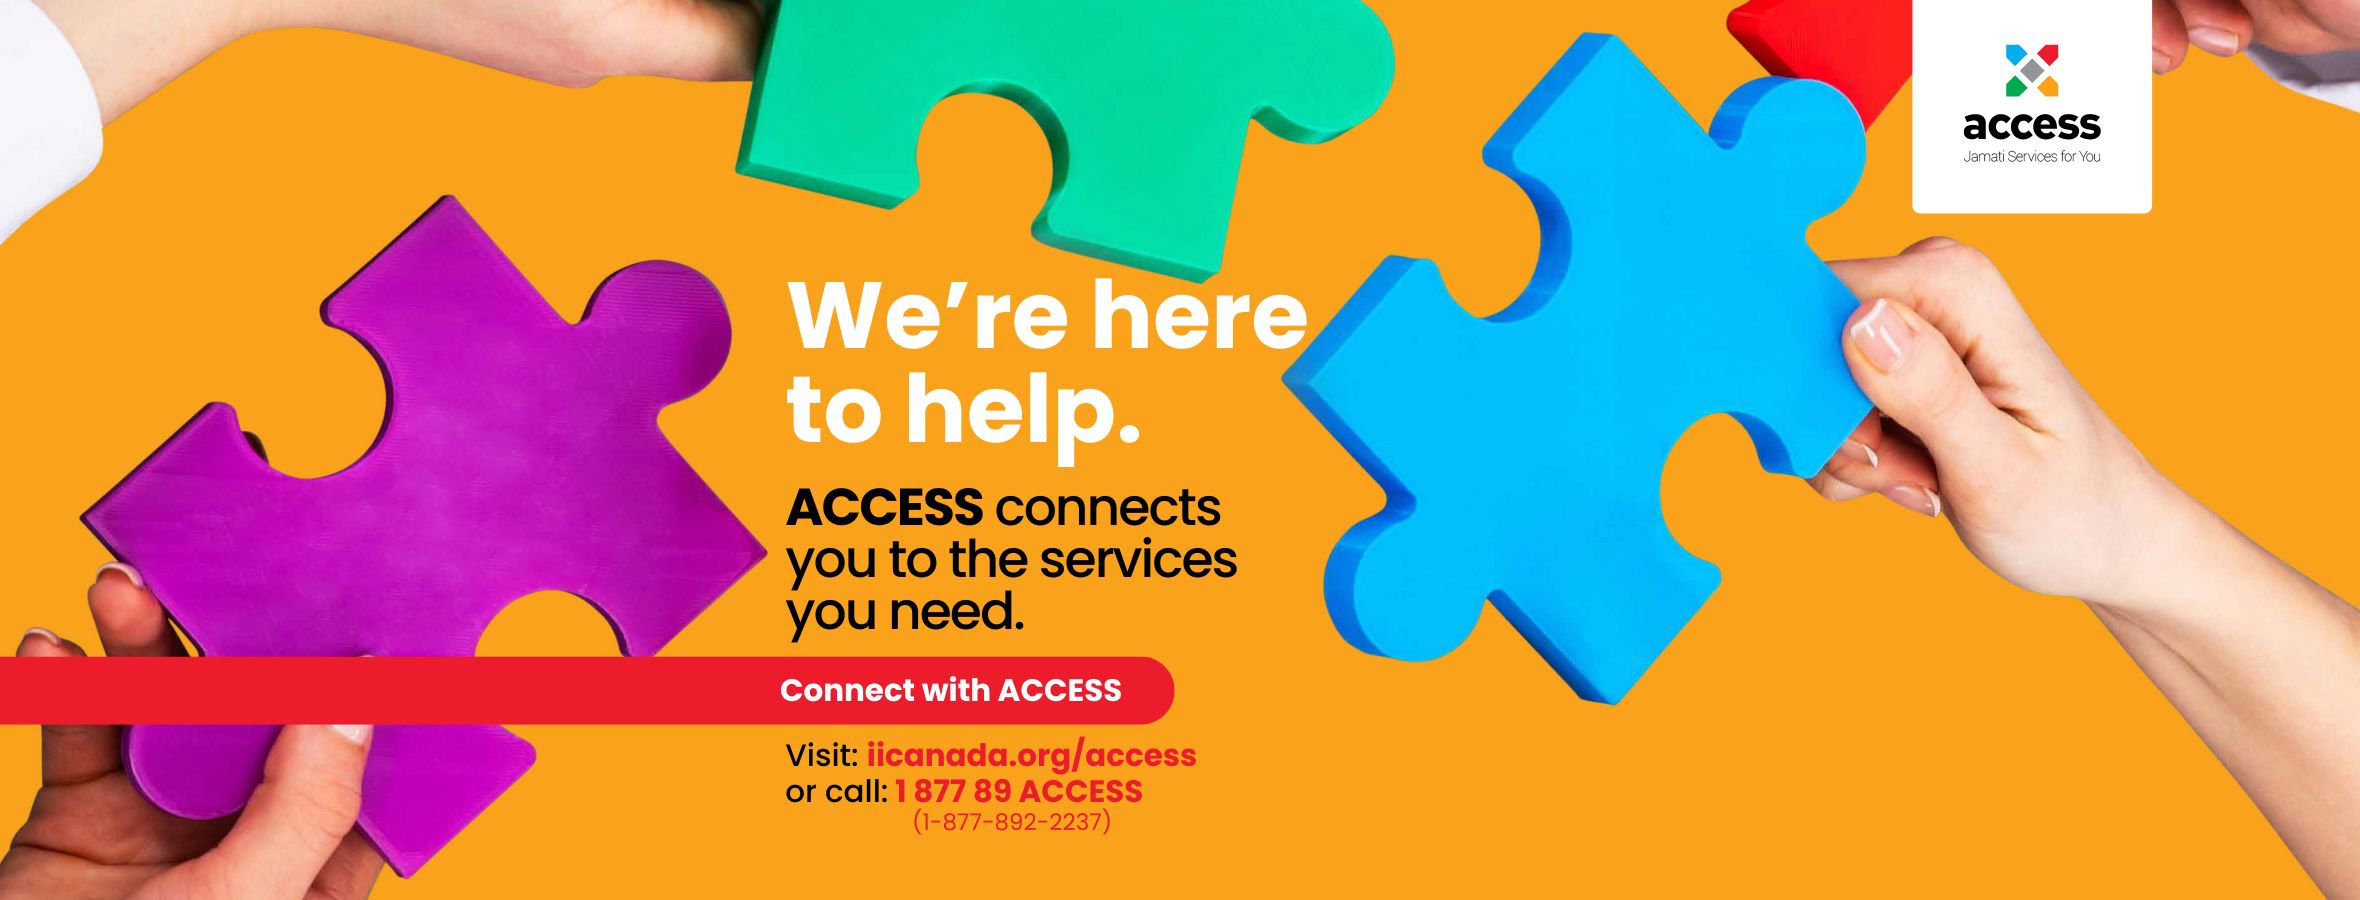 ACCESS launches new phone number and extended hours